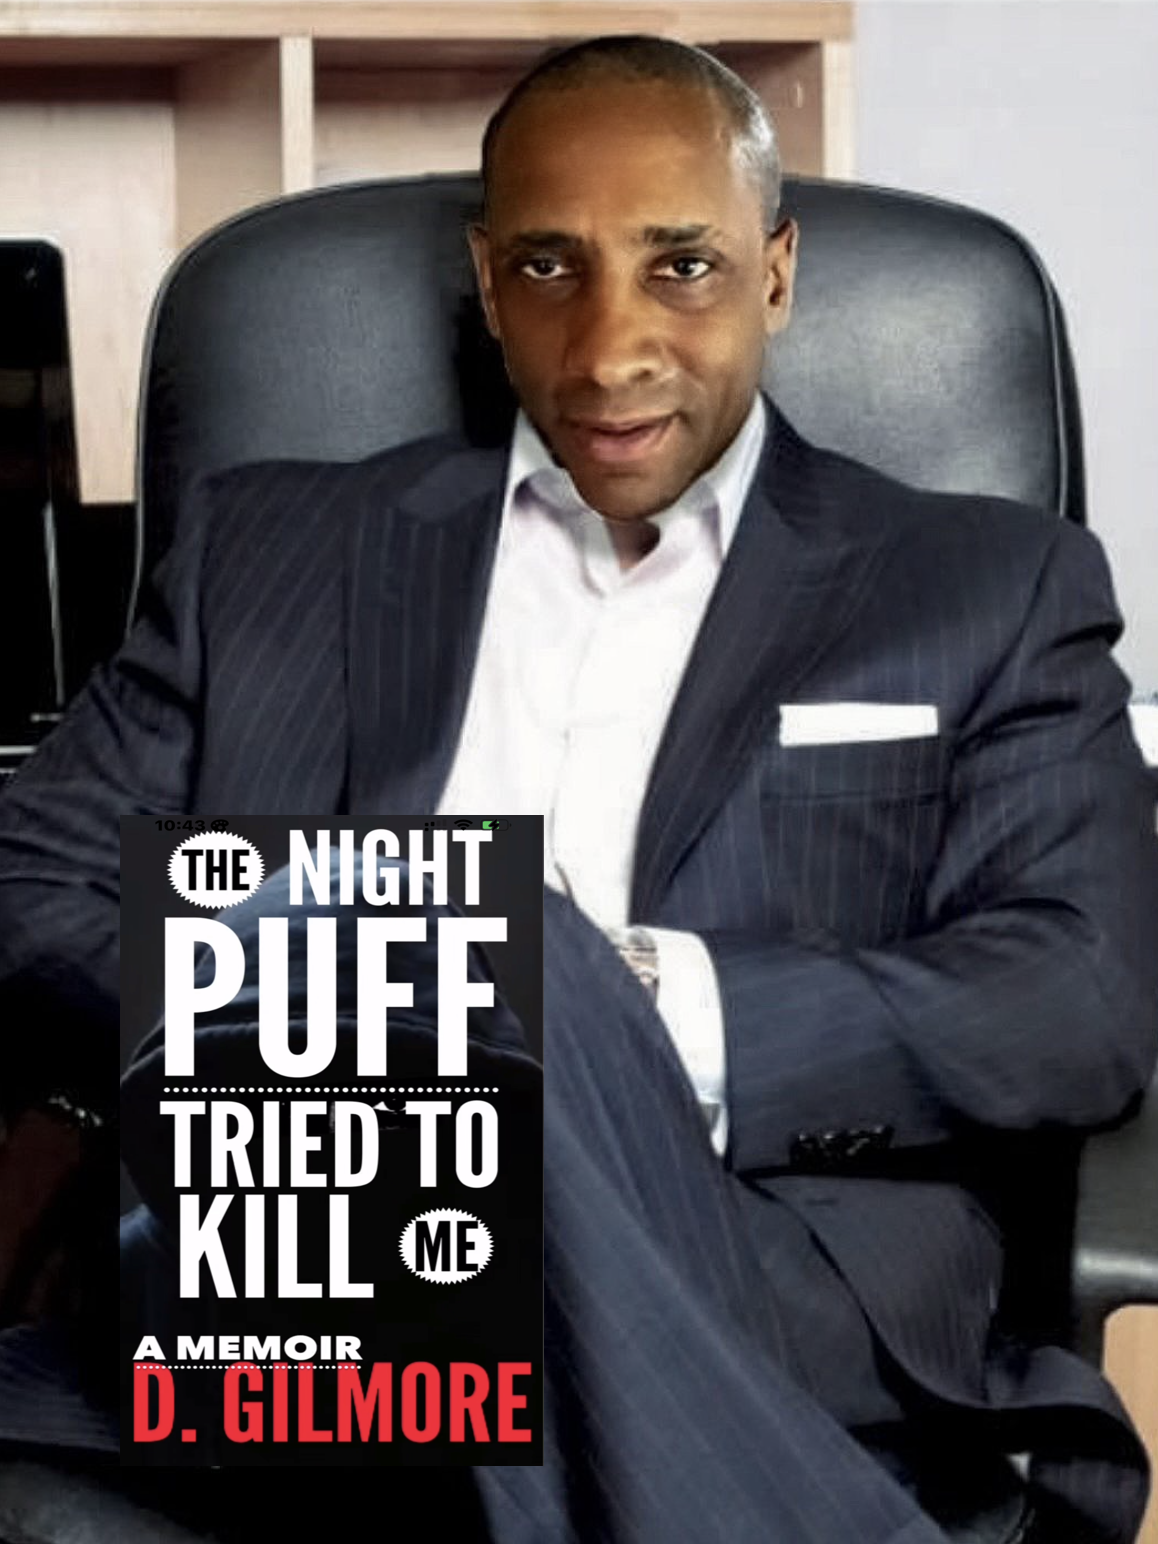 DeWitt Gilmore grew up in Mount Vernon NY, a town that Puff aka Diddy claims when it's convenient. However the entrepreneur has evolved into an award-winning novelist and now he drops a bombshell memoir about "The Night Puff Tried To Kill Me"